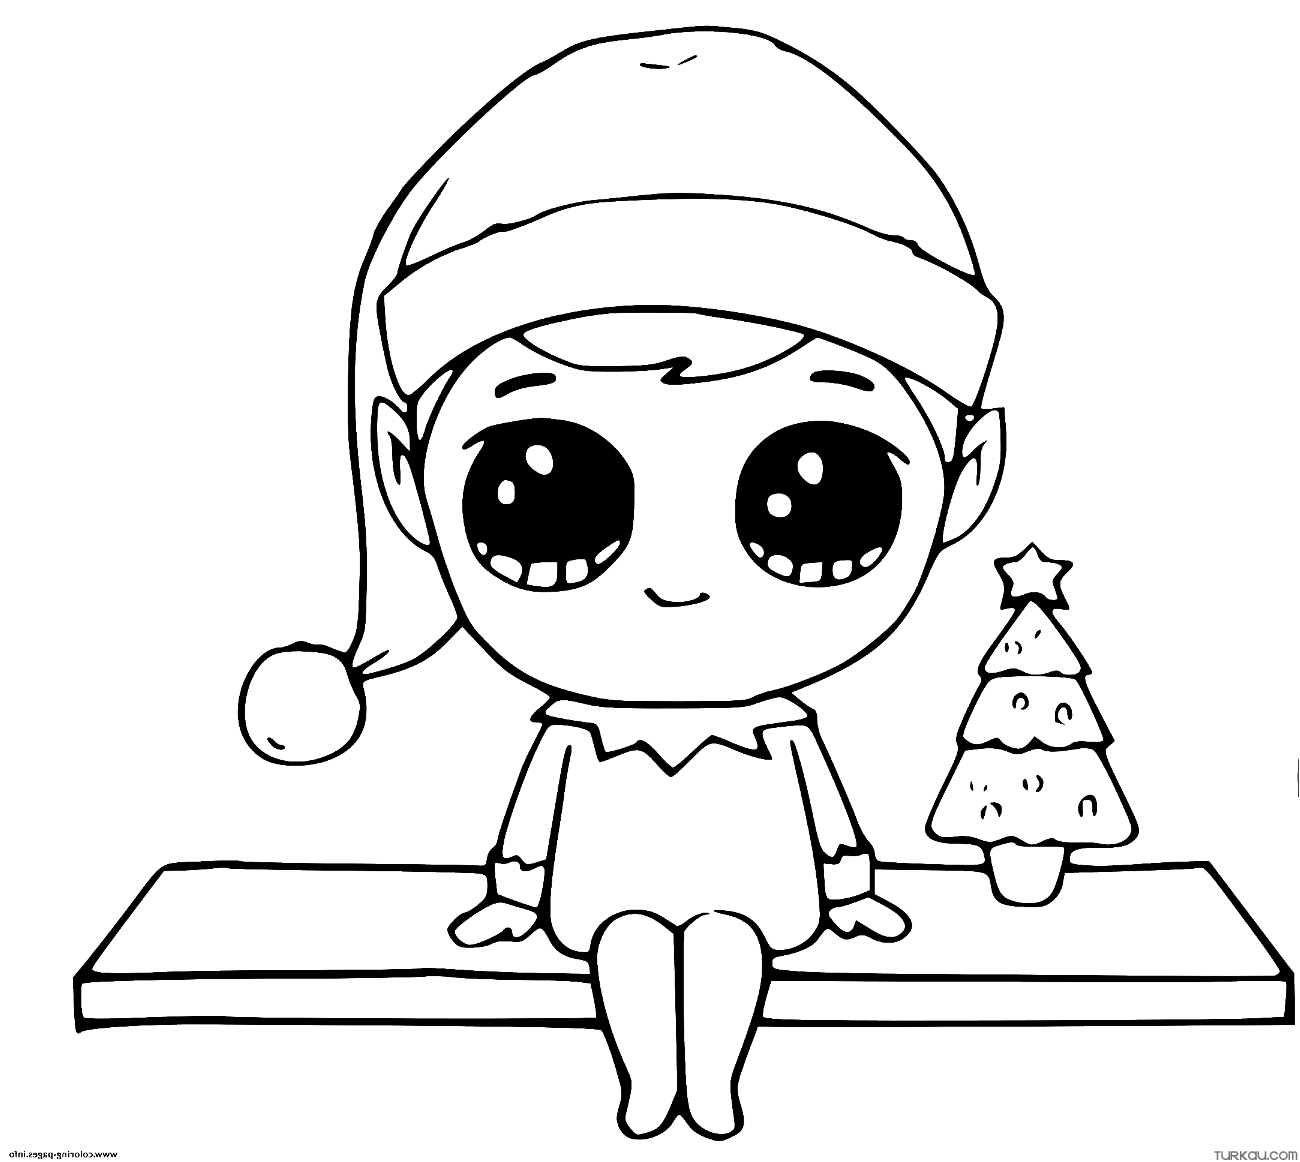 New Elf On The Shelf Coloring Page » Turkau